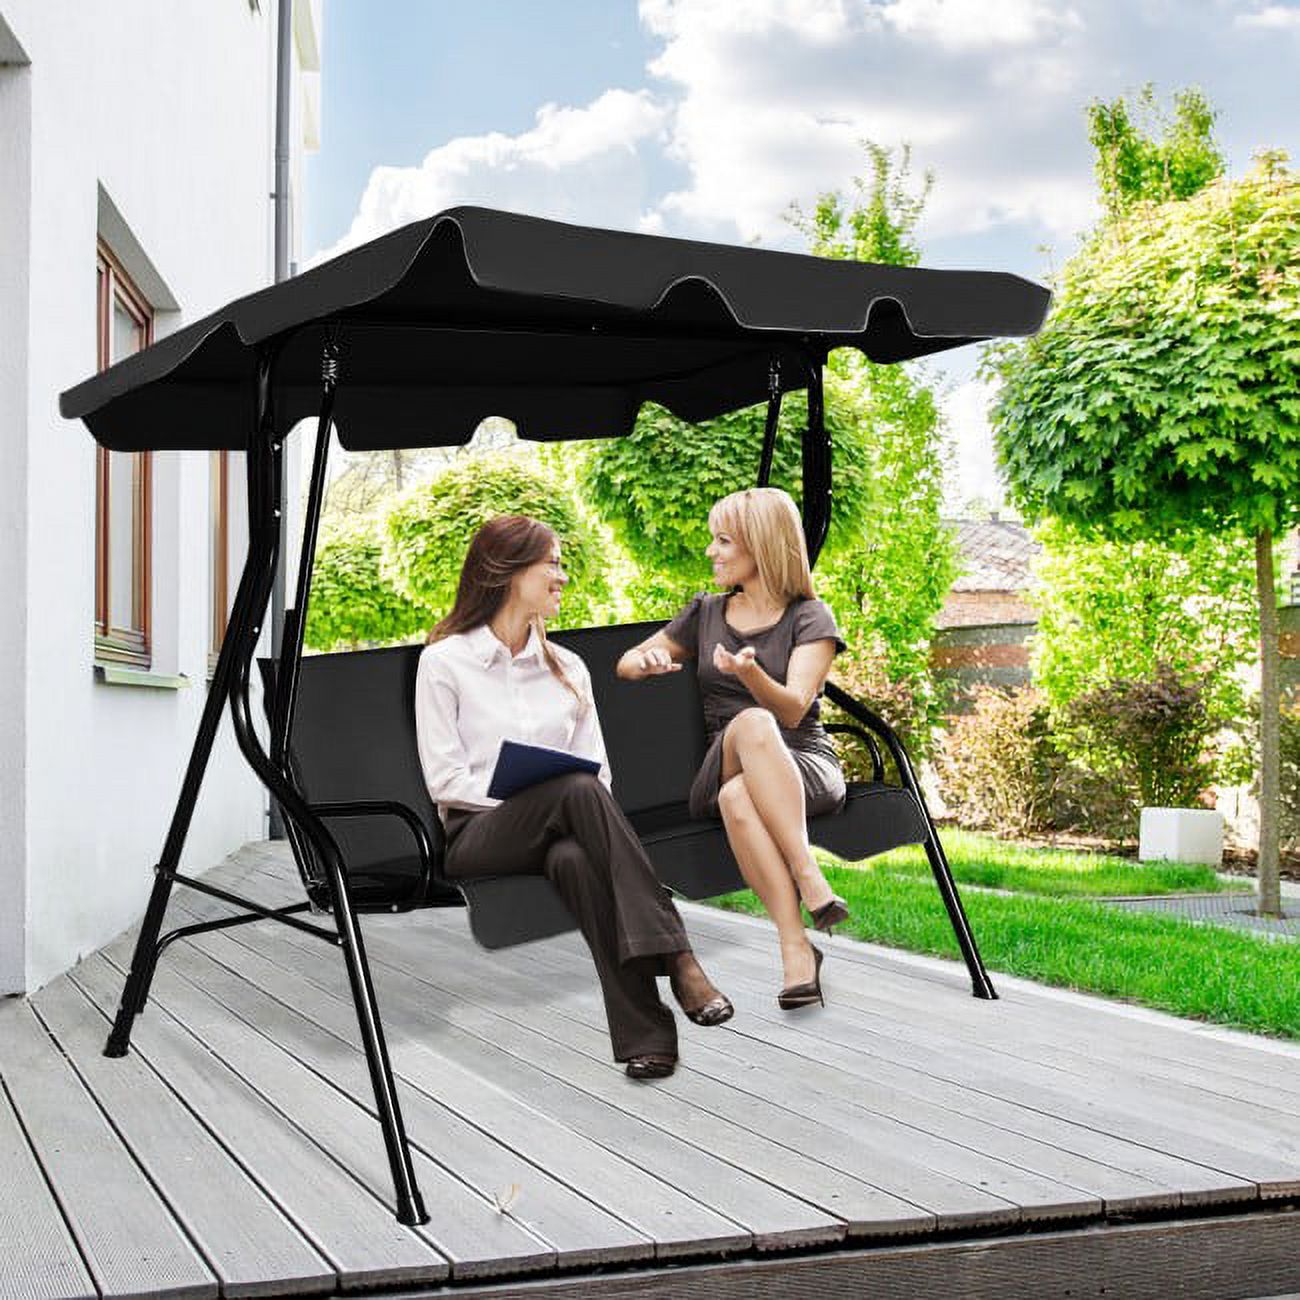 3 Seat Canopy Swing with Cushioned Steel Frame Outdoor Garden Patio Lounge Chair - image 5 of 8